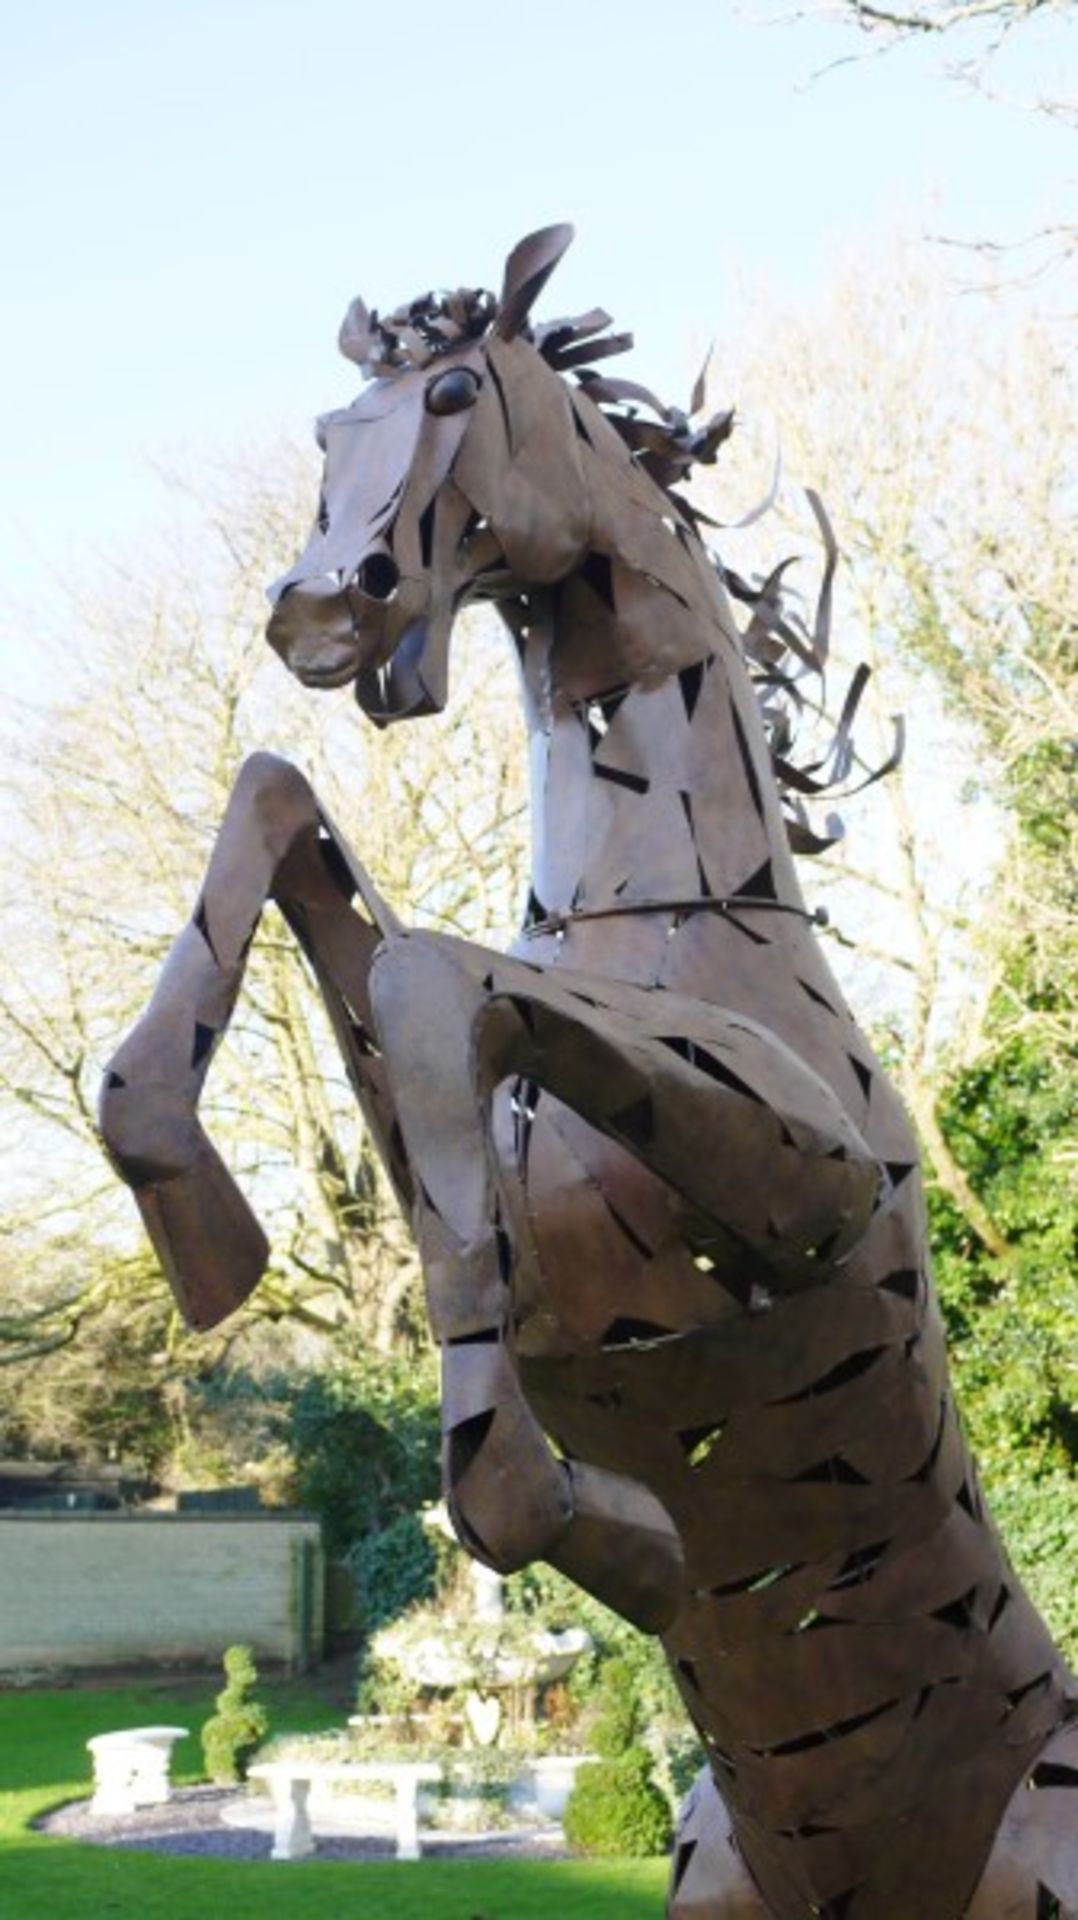 VERY RARE METAL REARING HORSE STATUE - 11 FEET HIGH ! - Image 2 of 6